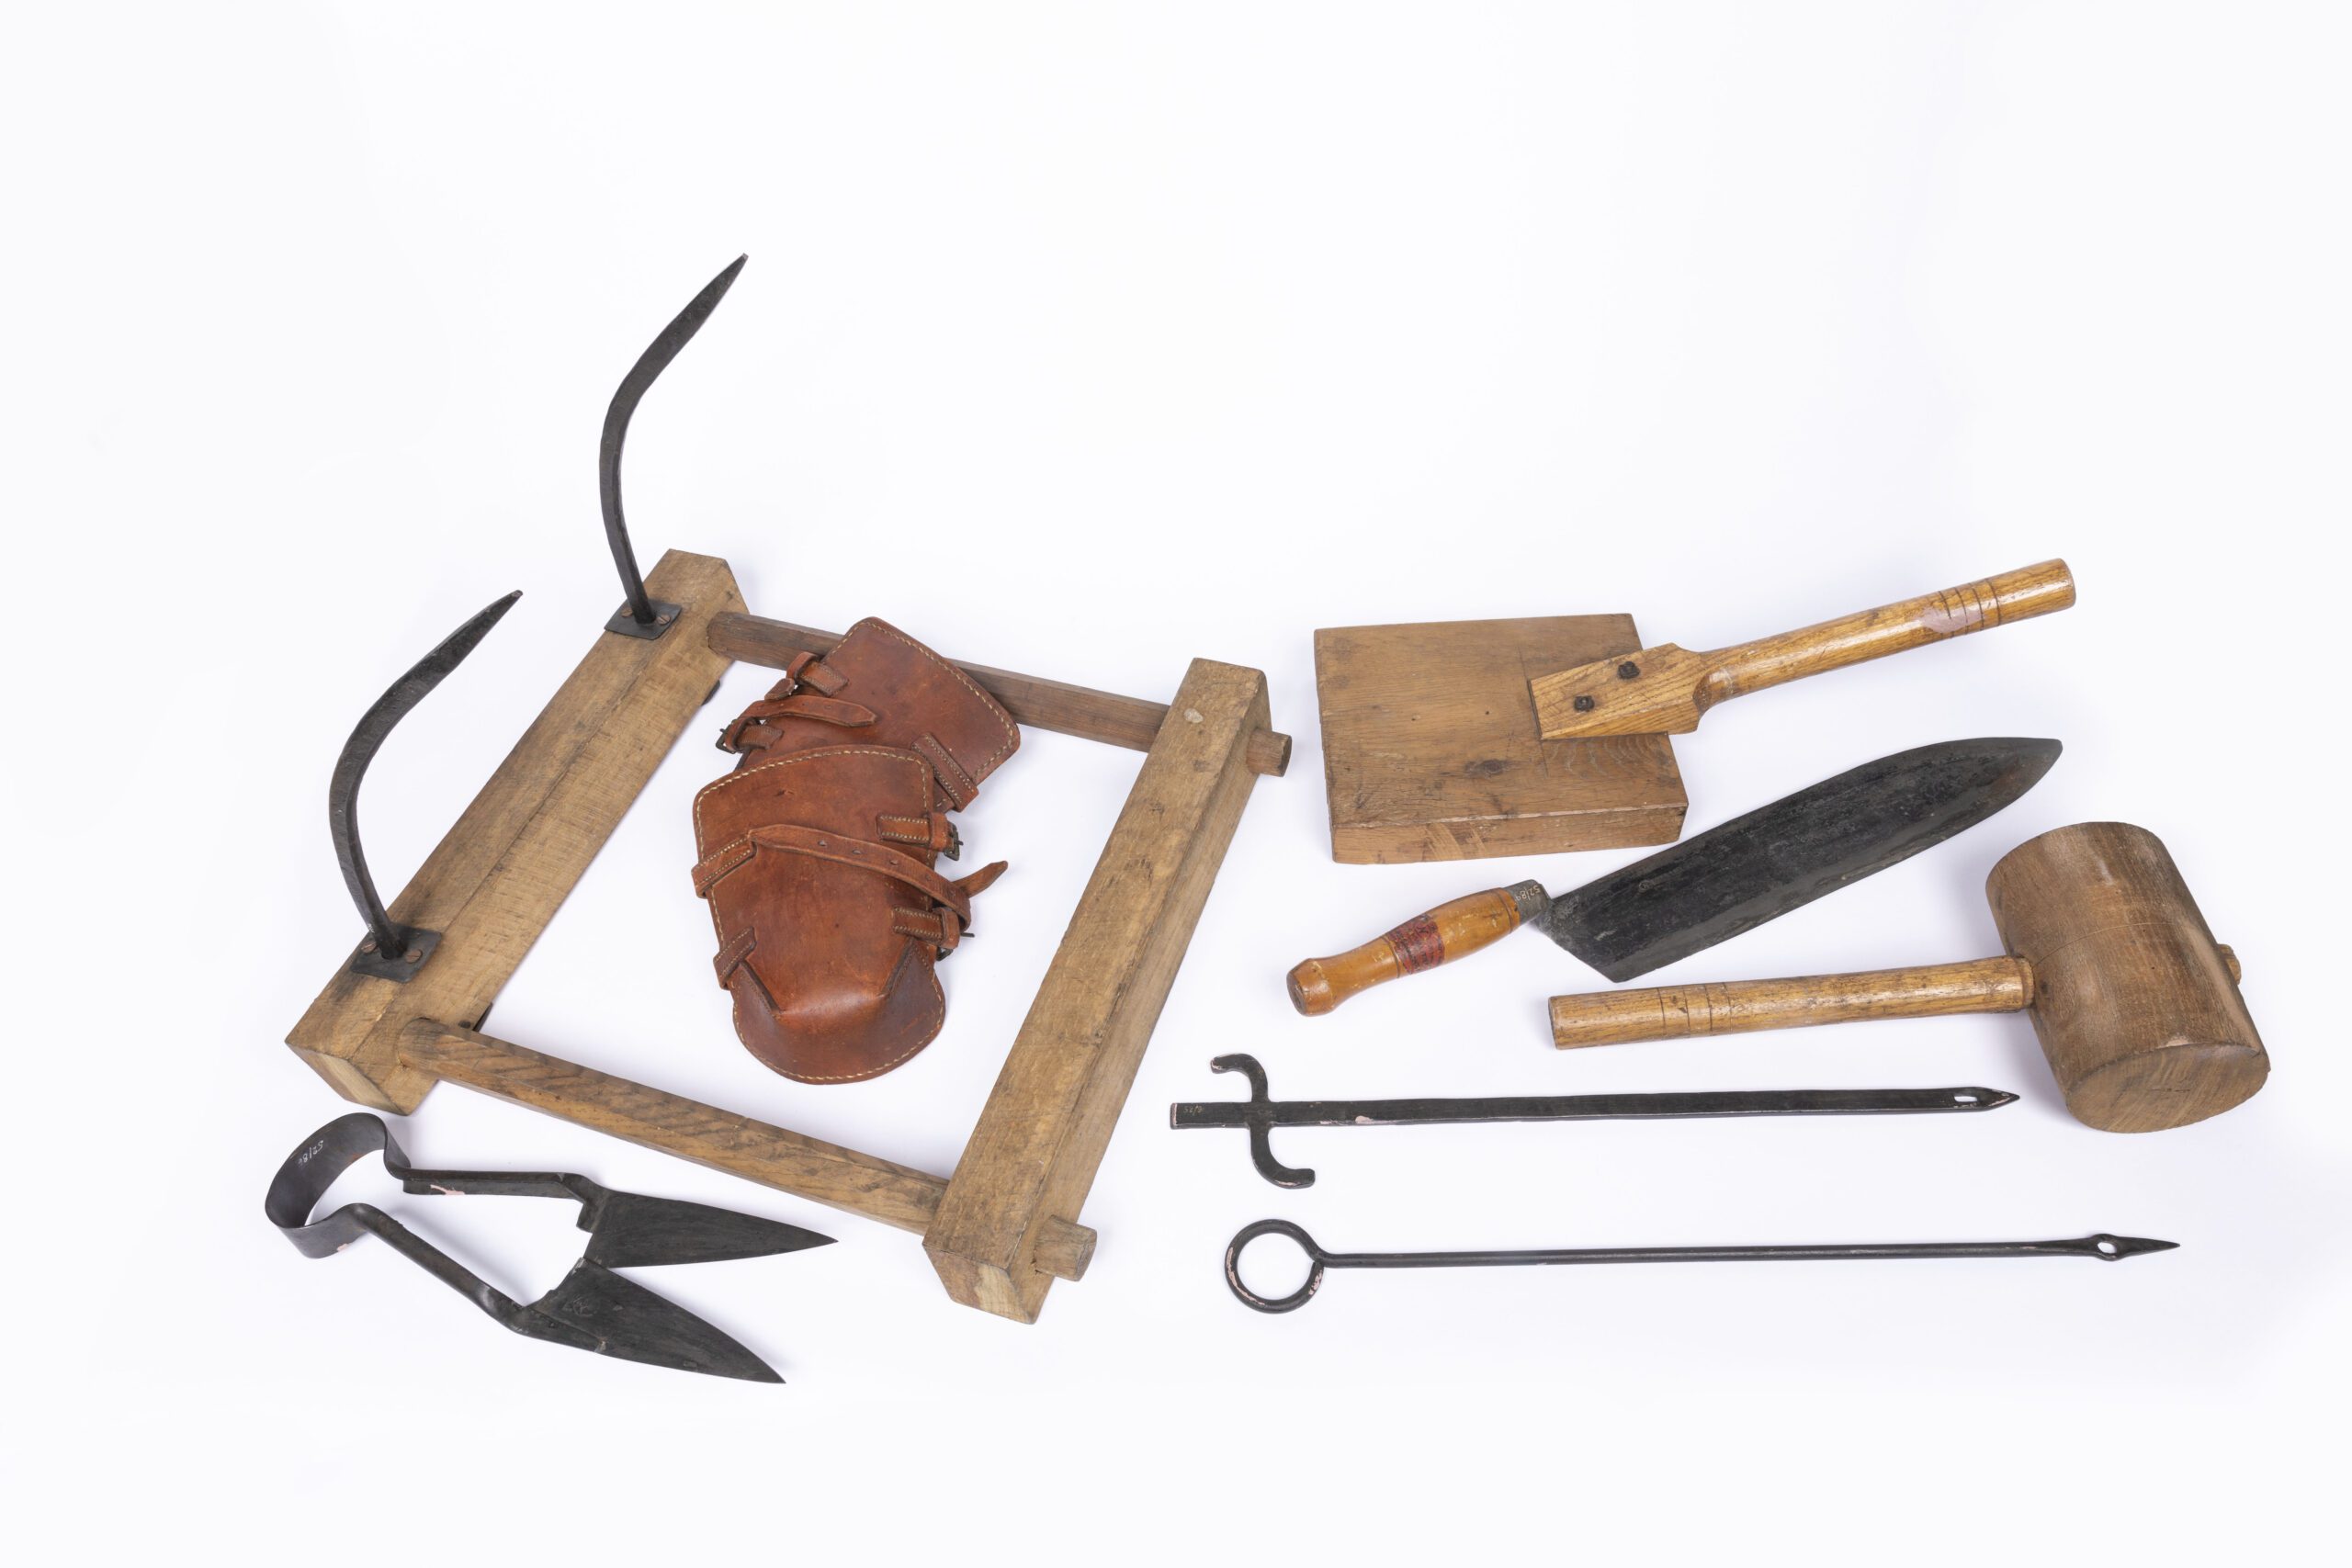 38. Thatching Tools